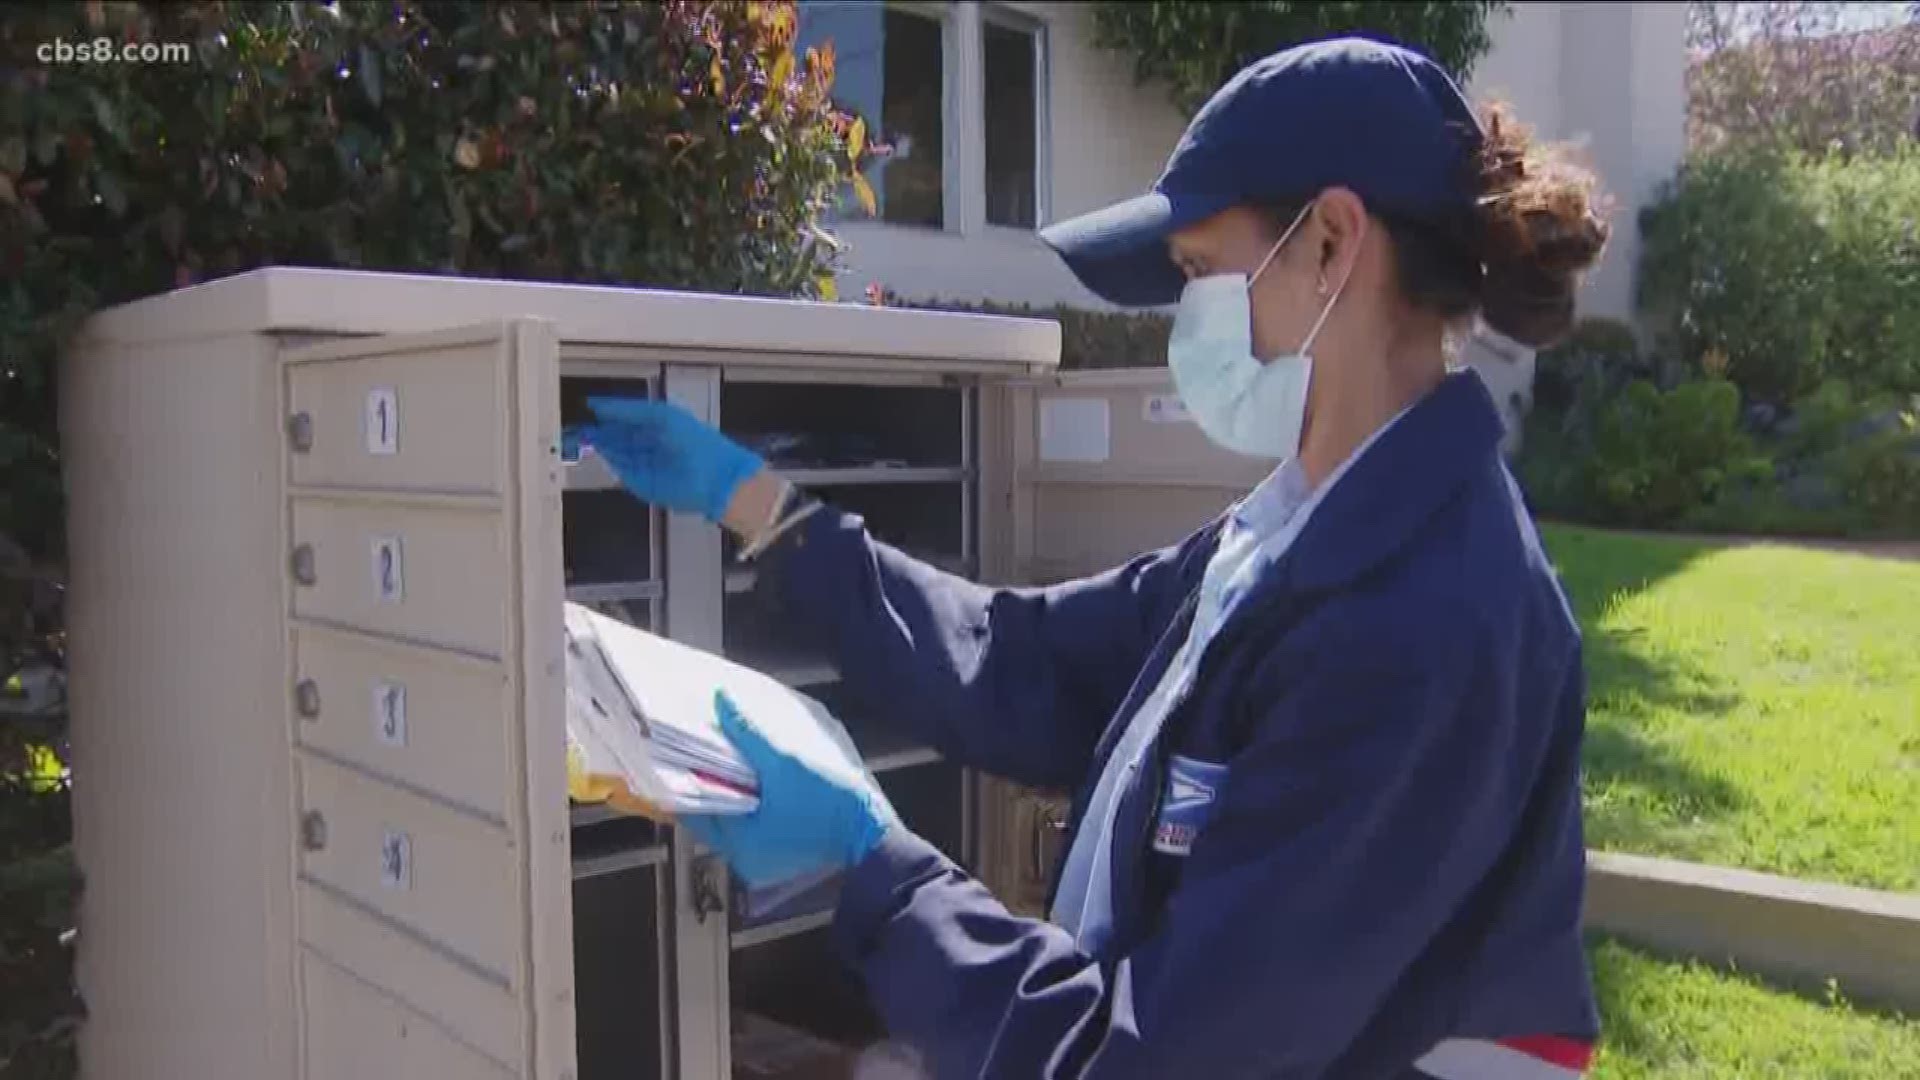 News 8's Abbie Alford shares with us what life on the route is like these days for a USPS worker.